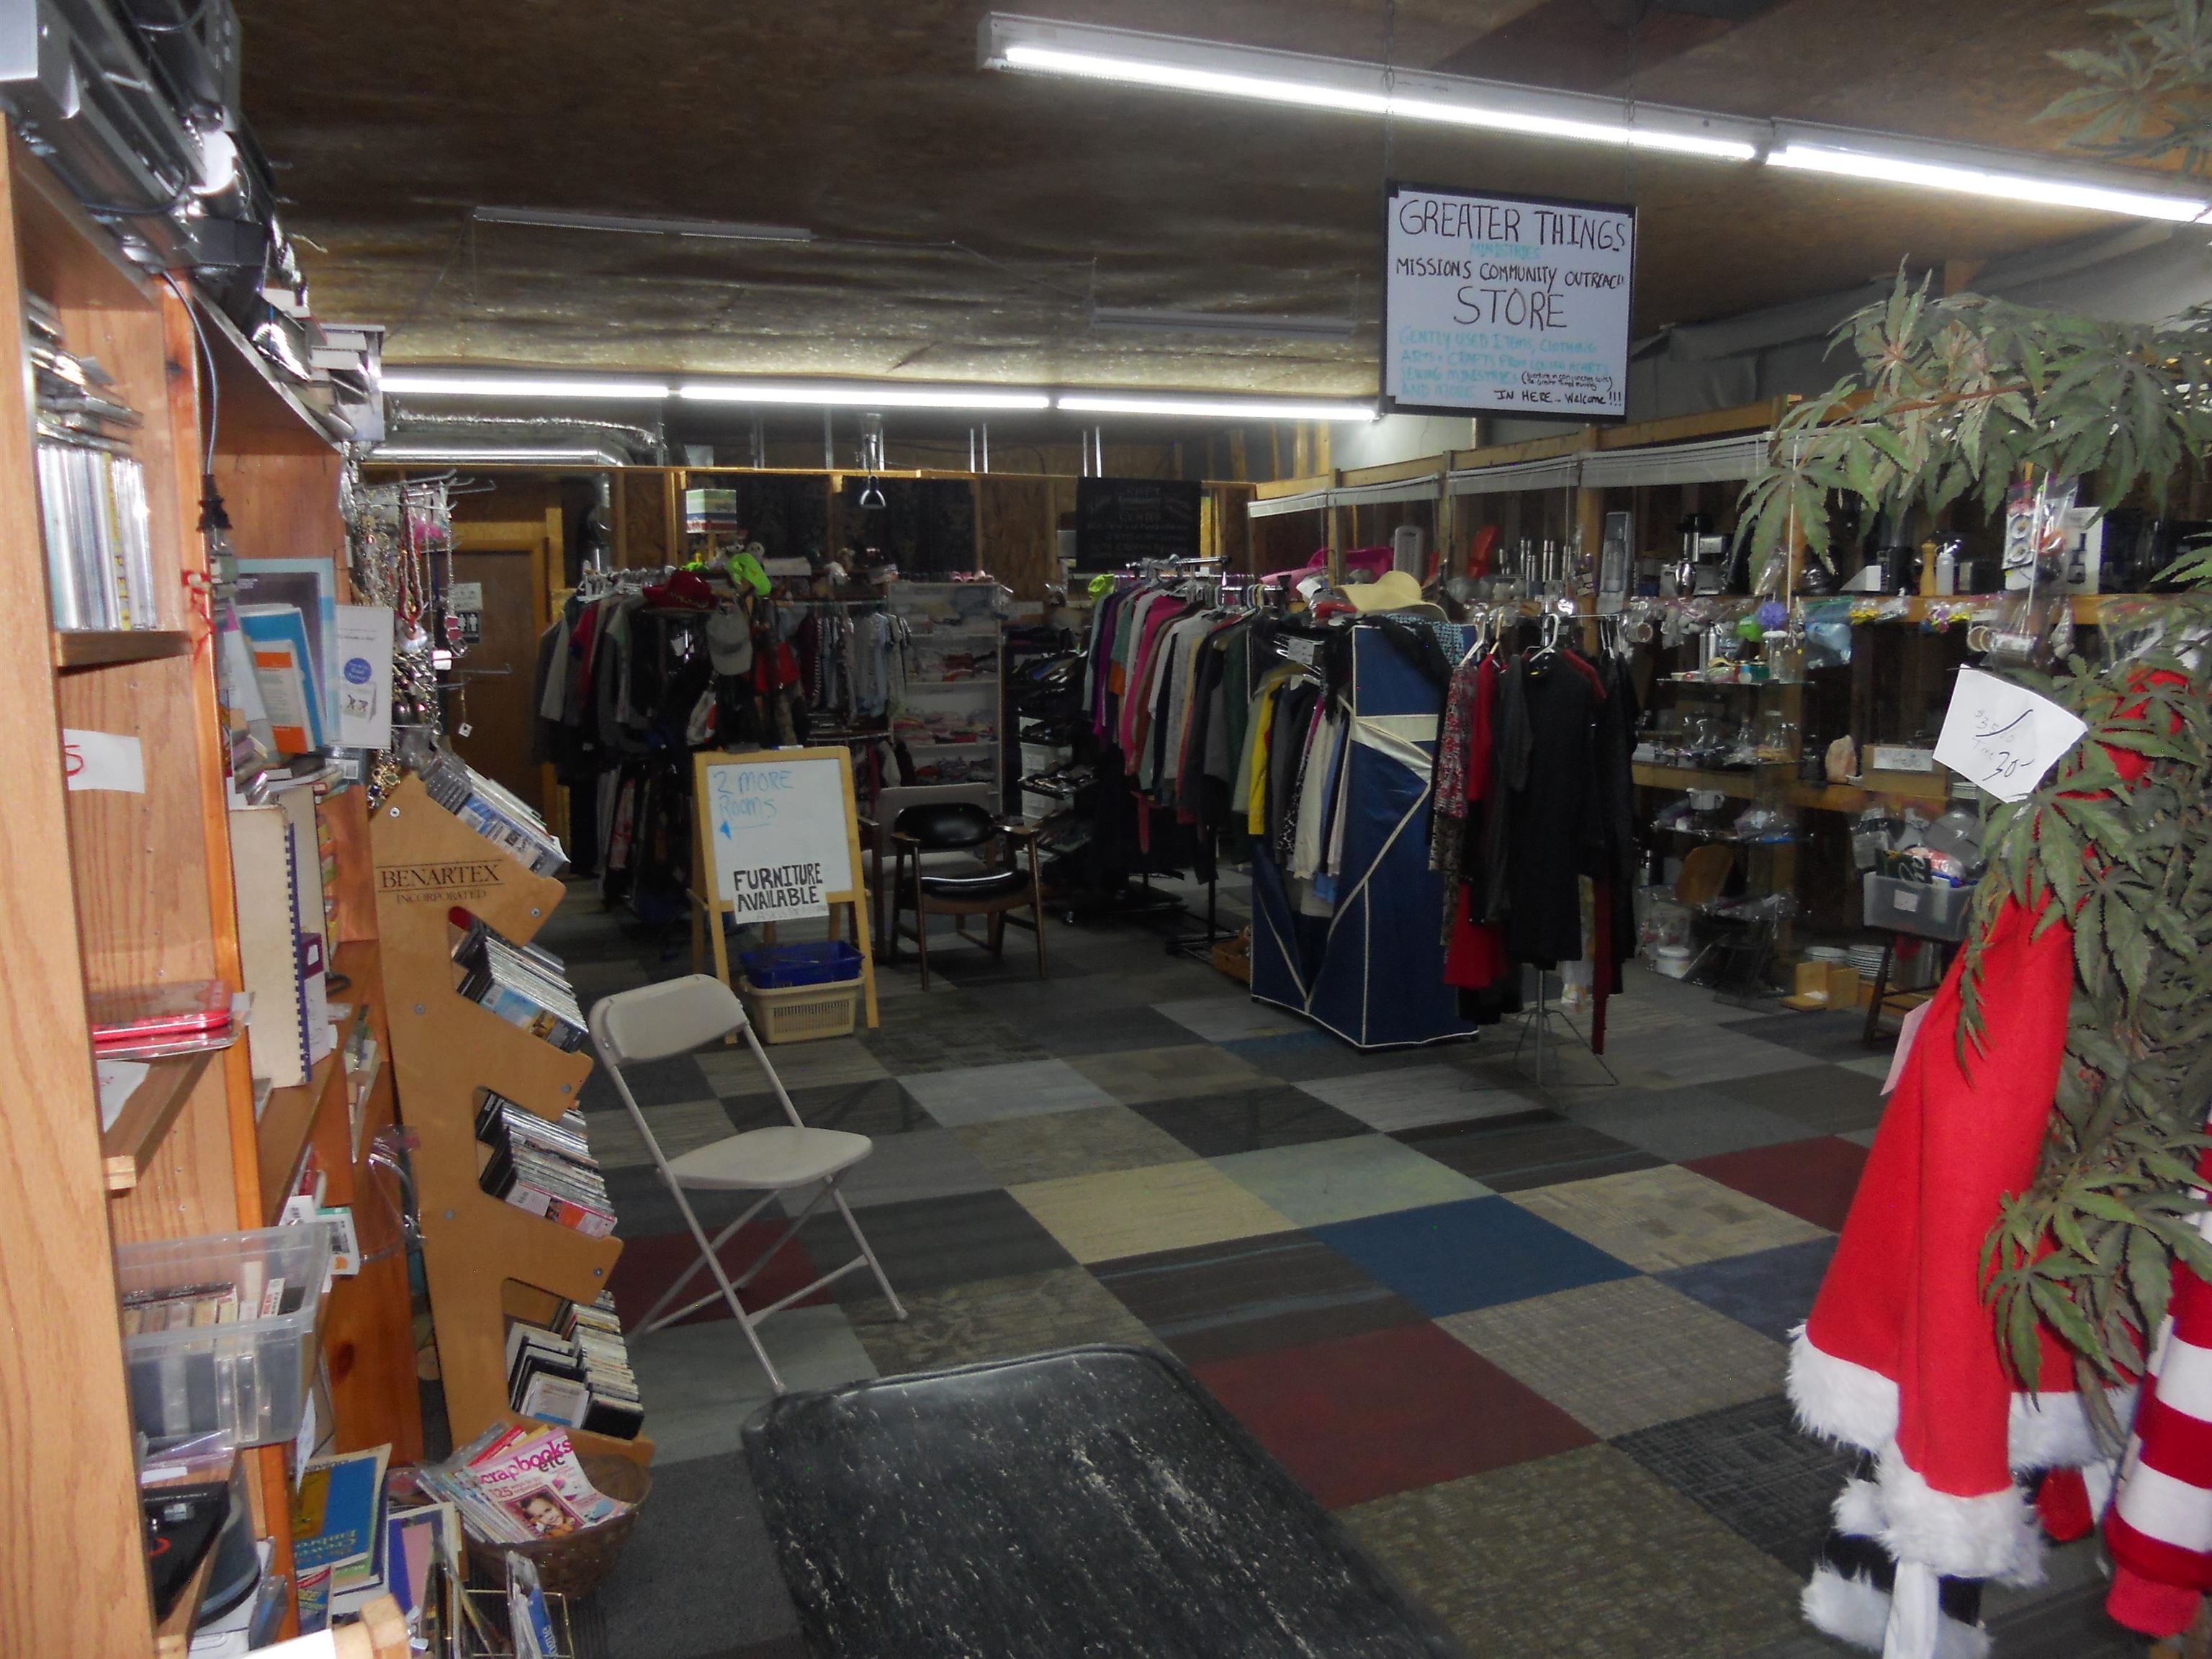 2000 Sq Ft Thrift Store Space